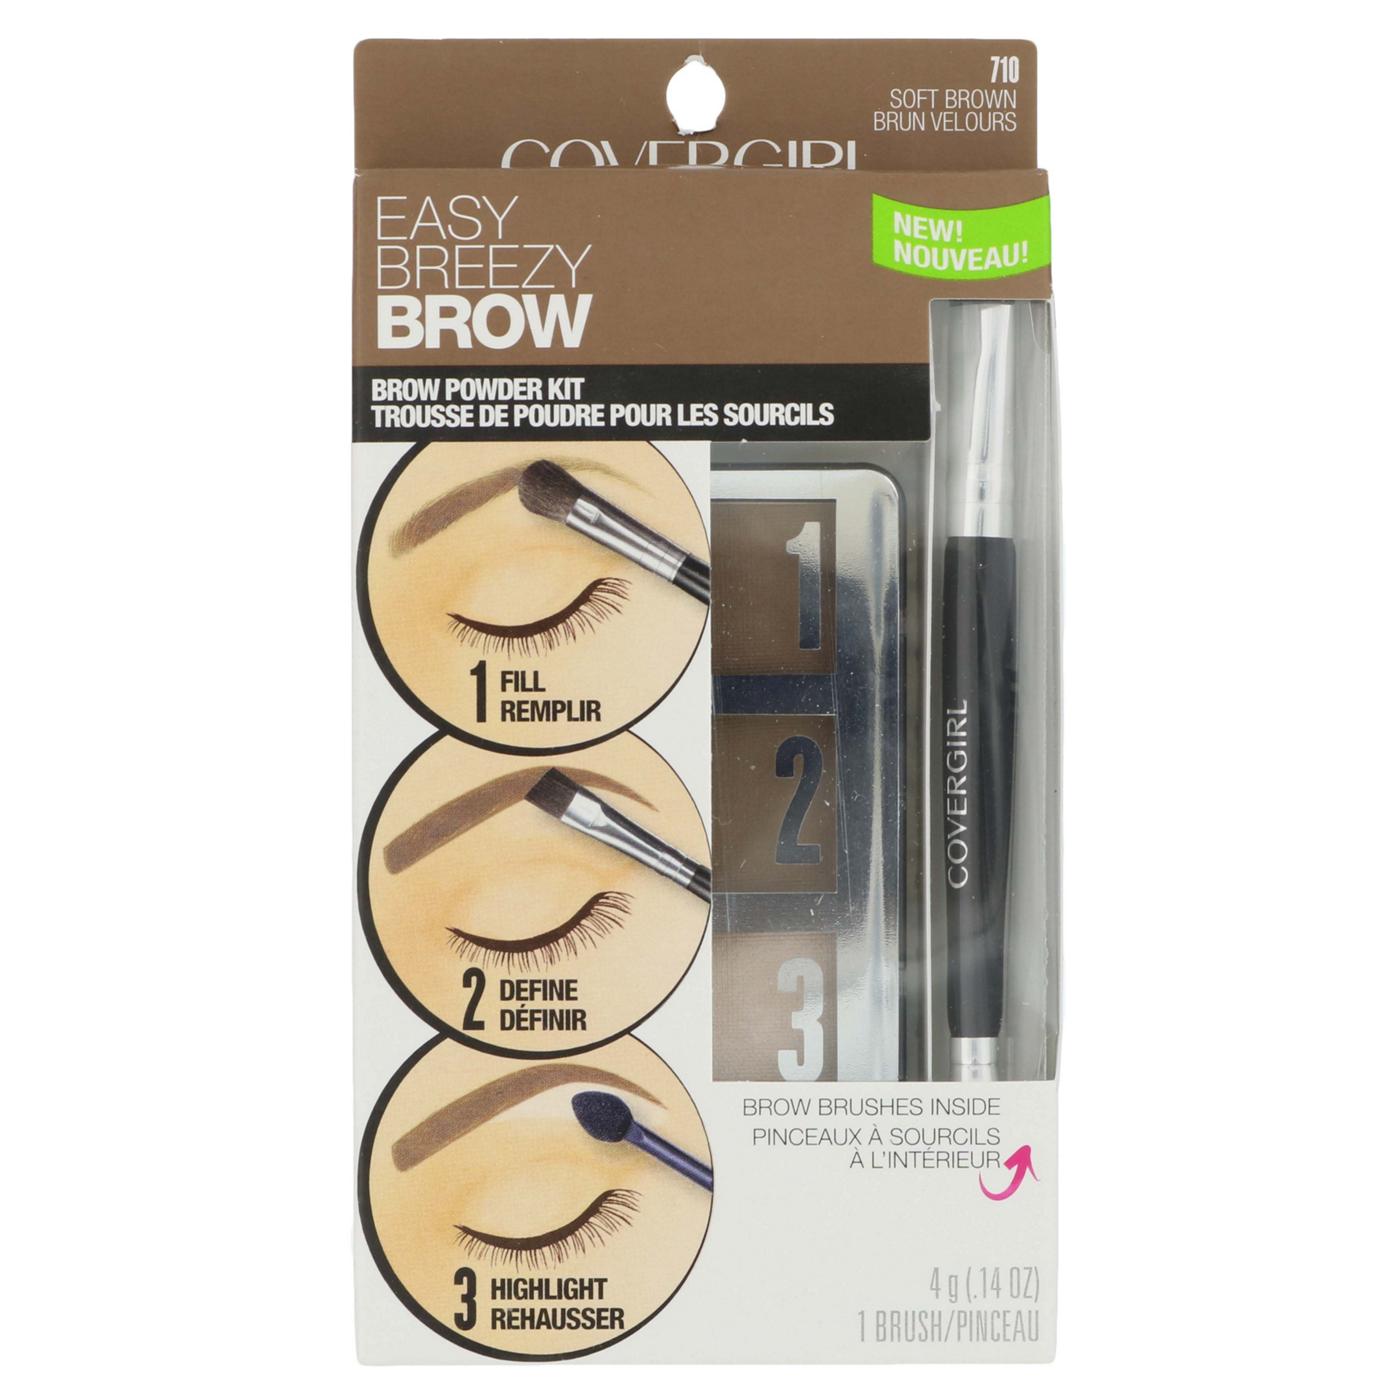 Covergirl Easy Breezy Brow Powder Kit 710 Soft Brown; image 1 of 8